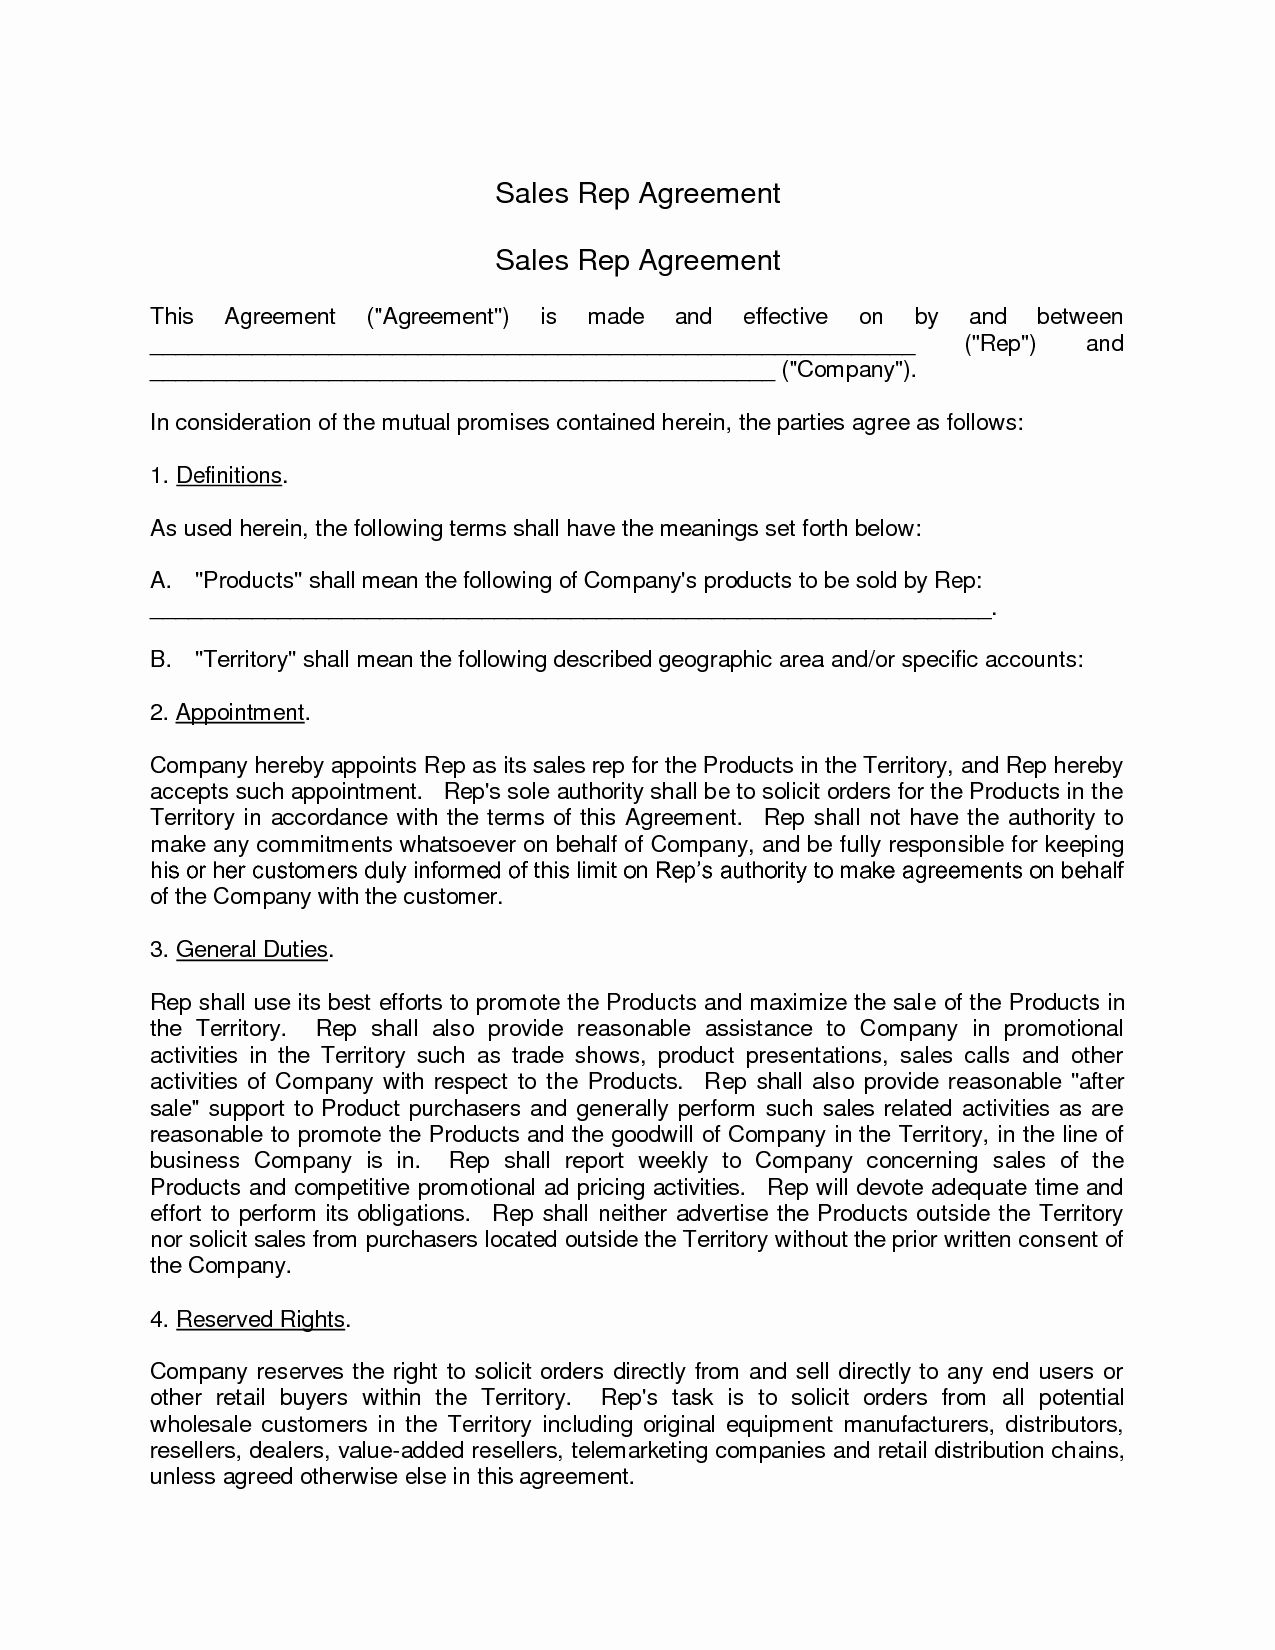 Sales Rep Agreement Sample - Judy Blankenship'S Template within Amazing Sales Rep Employment Contract Template